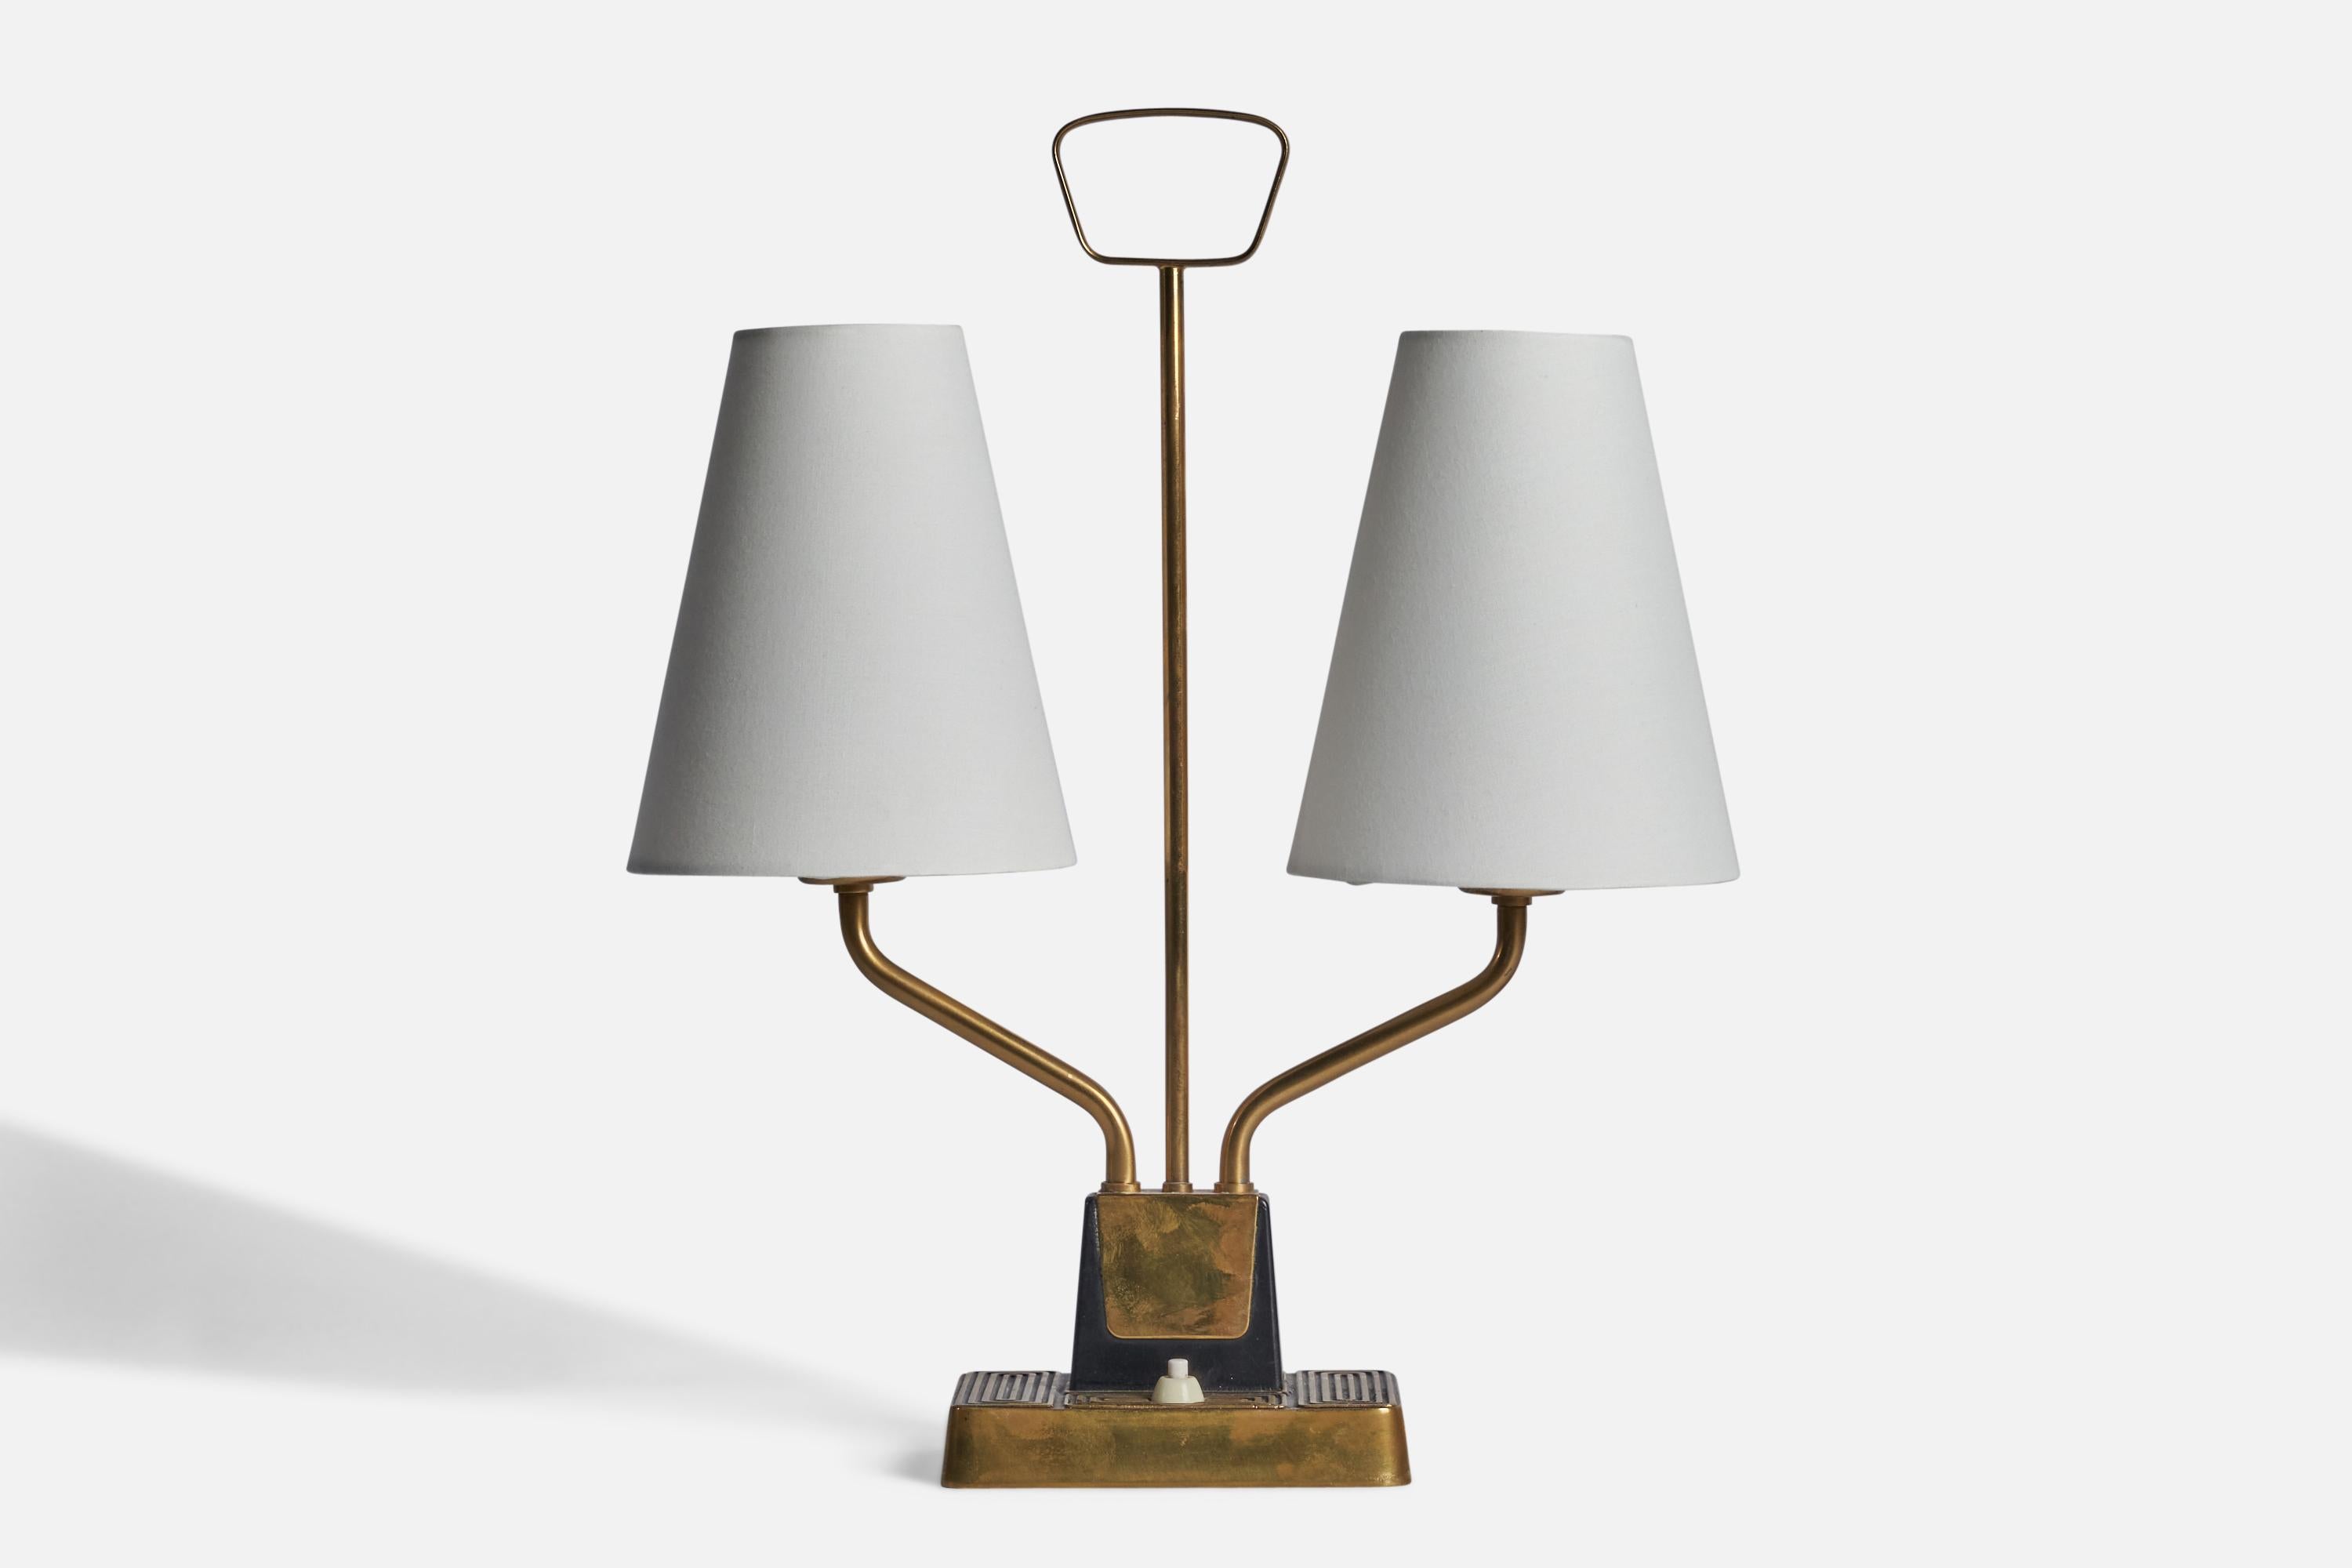 A brass, black-lacquered metal and white fabric table lamp designed by Sonja Katzin and produced by ASEA, Sweden, 1940s.

Overall Dimensions (inches): 16.75” H x 12.5” W x 4.25” 
Bulb Specifications: E-26 Bulb
Number of Sockets: 2
All lighting will